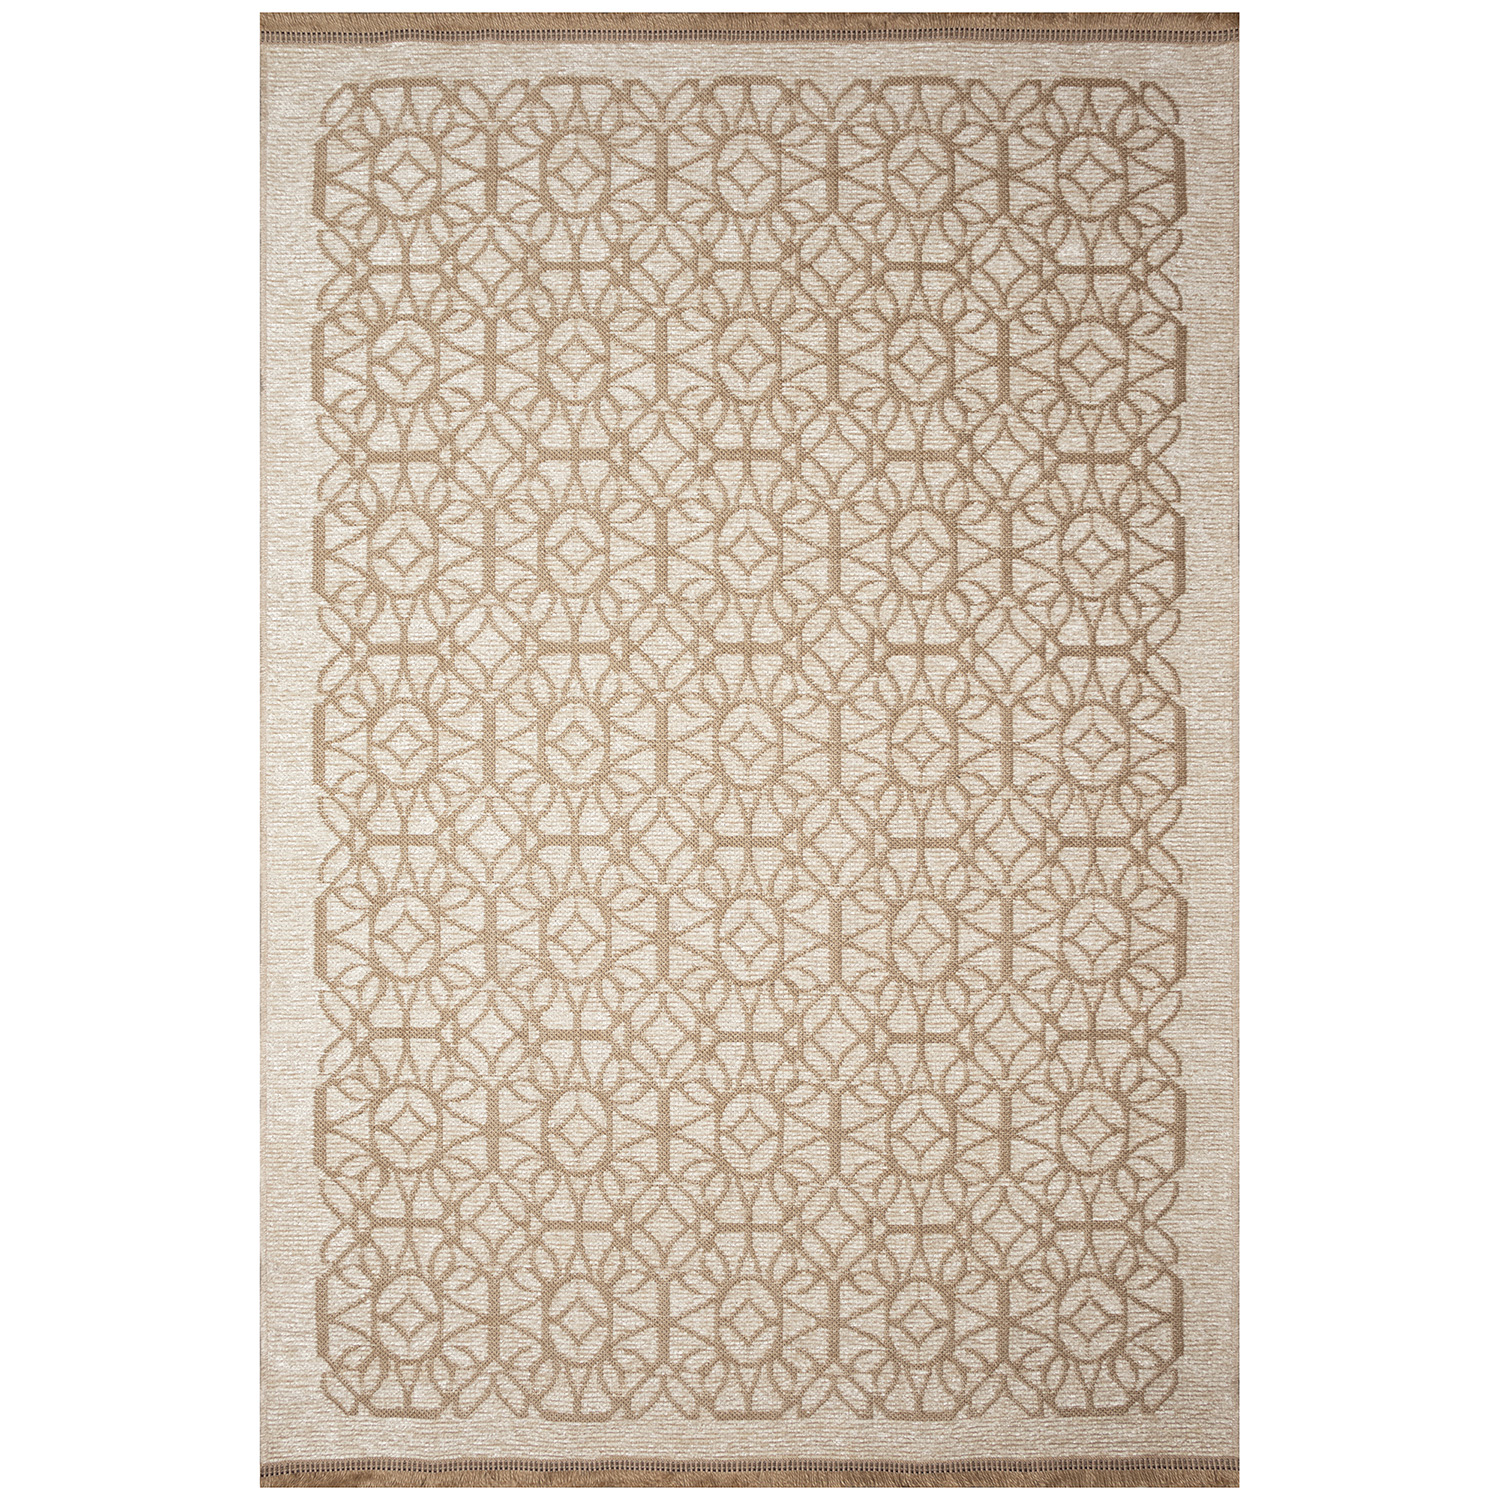 Liora Manne Mercer Low Profile  Non-Skid Indoor  Woven Rug- Tracery Ivory  Product Image